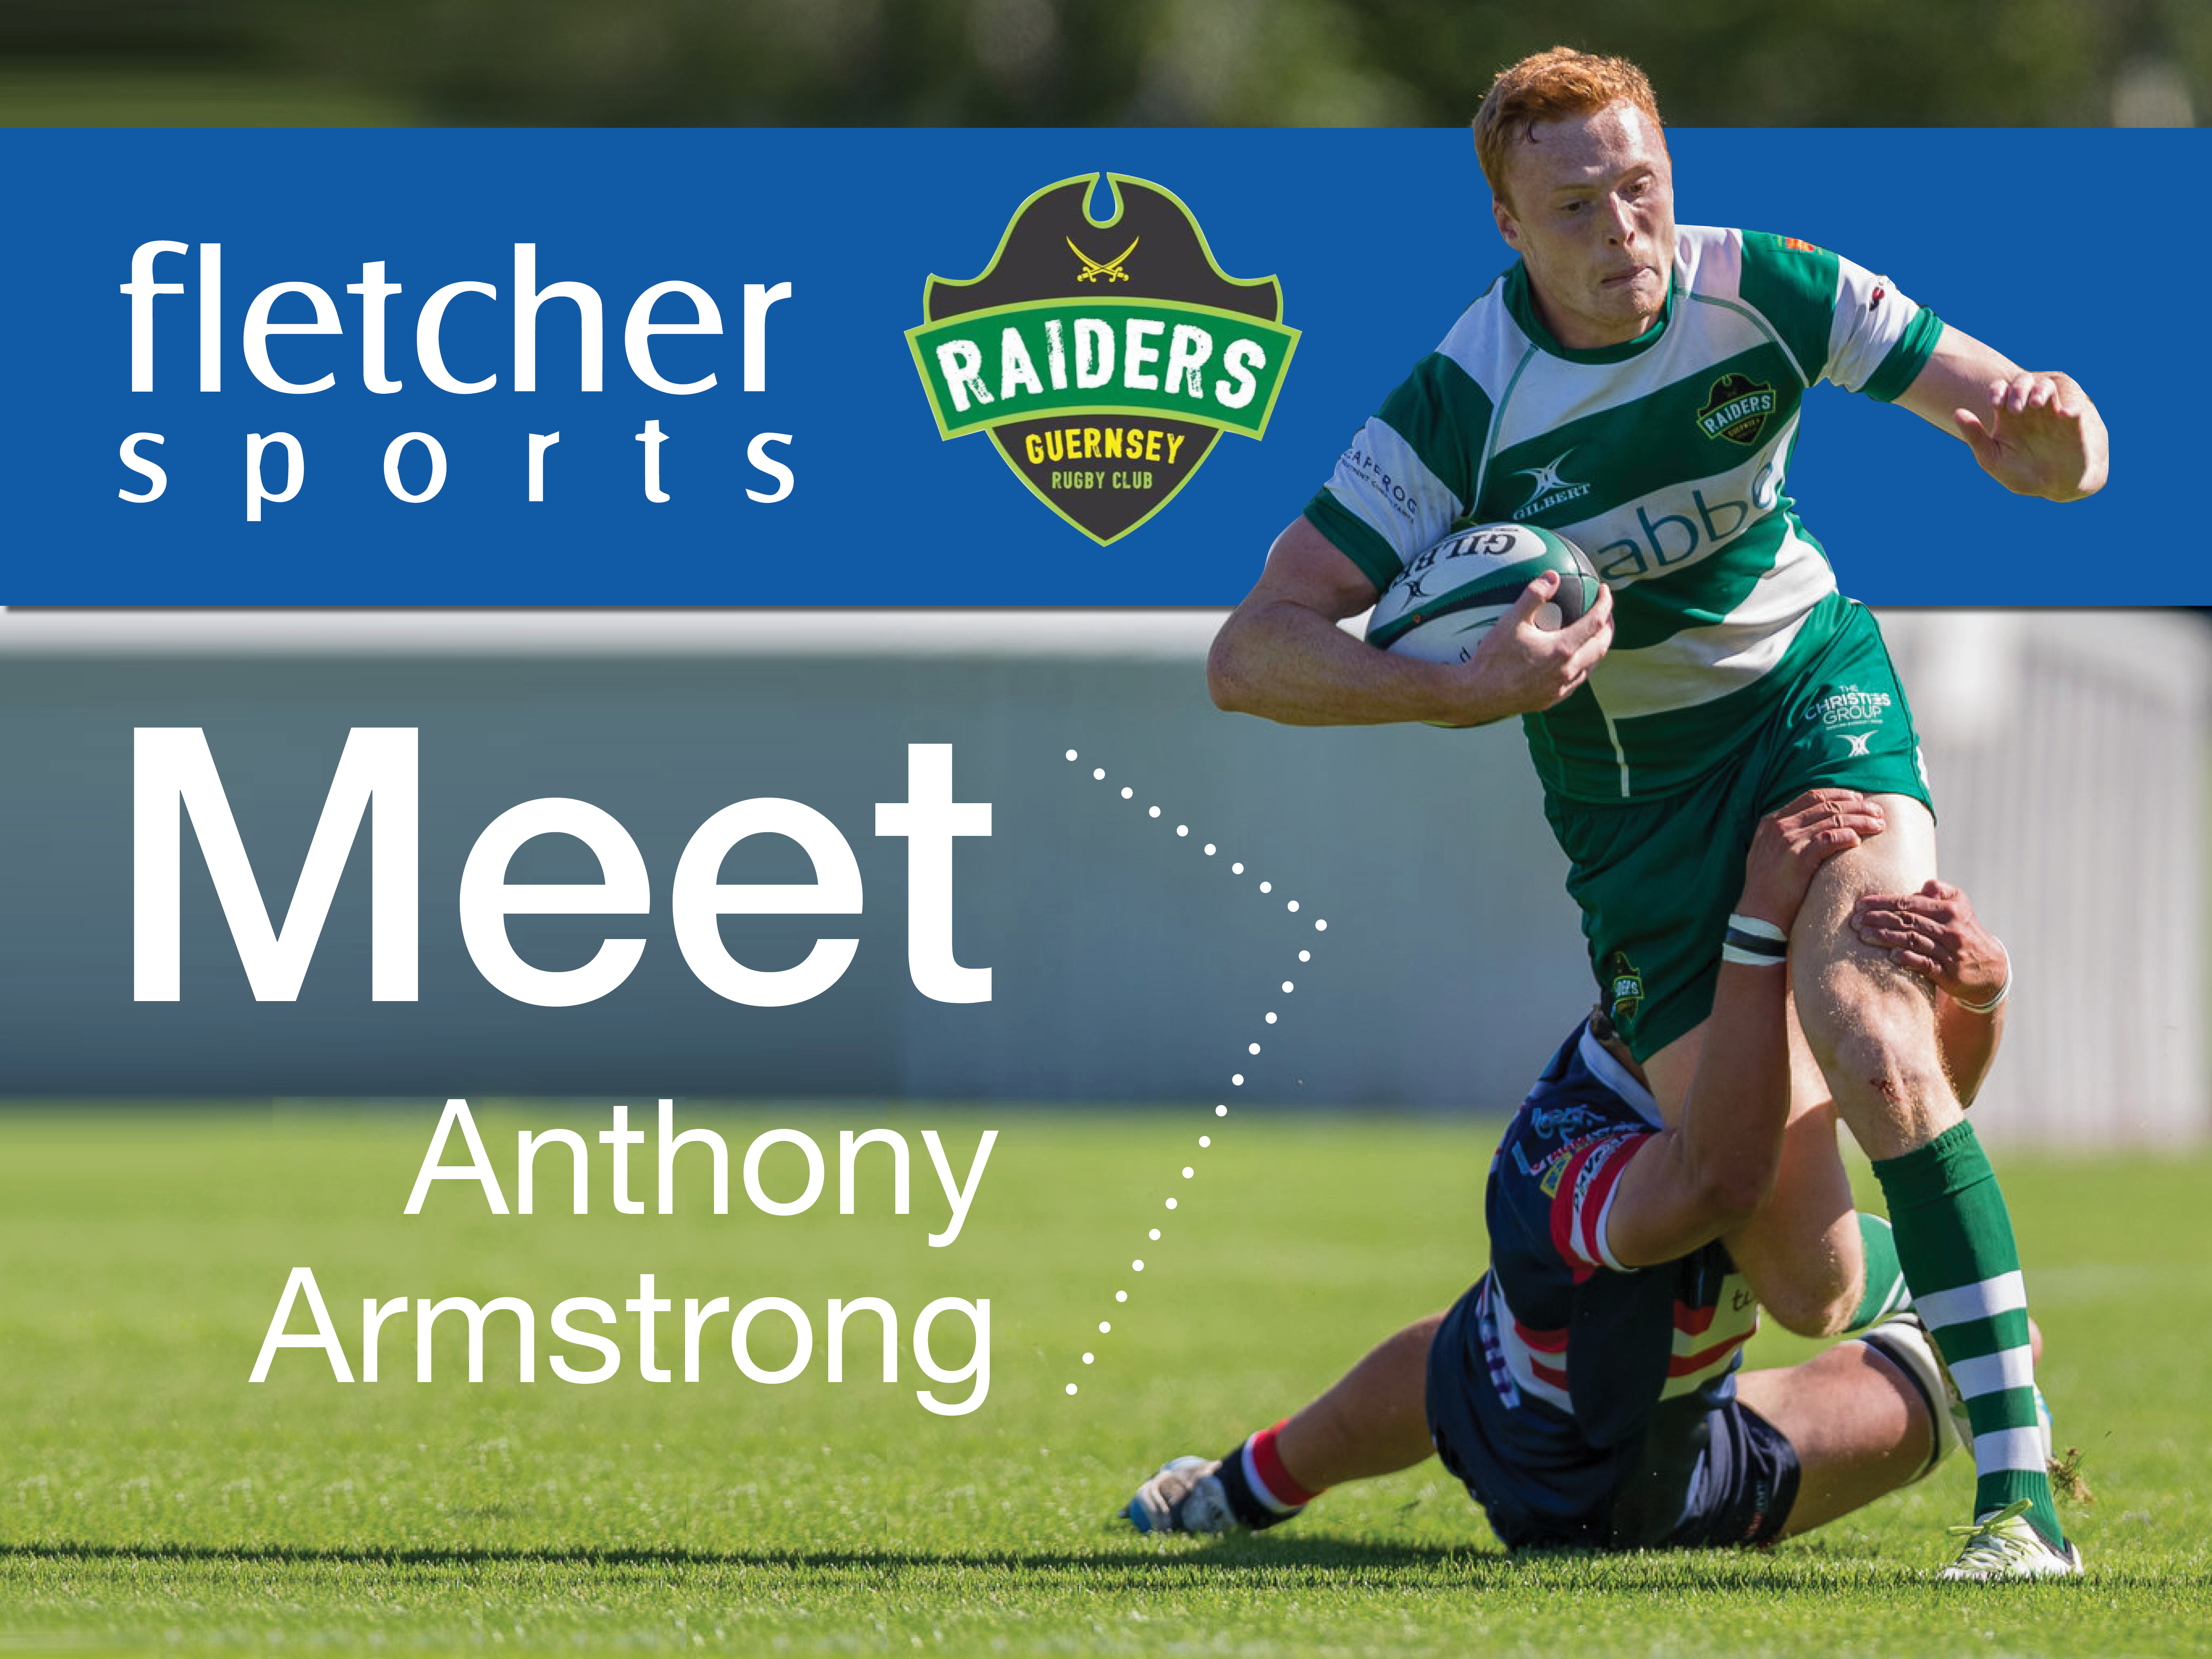 Fletcher Sports meet Anthony Armstrong